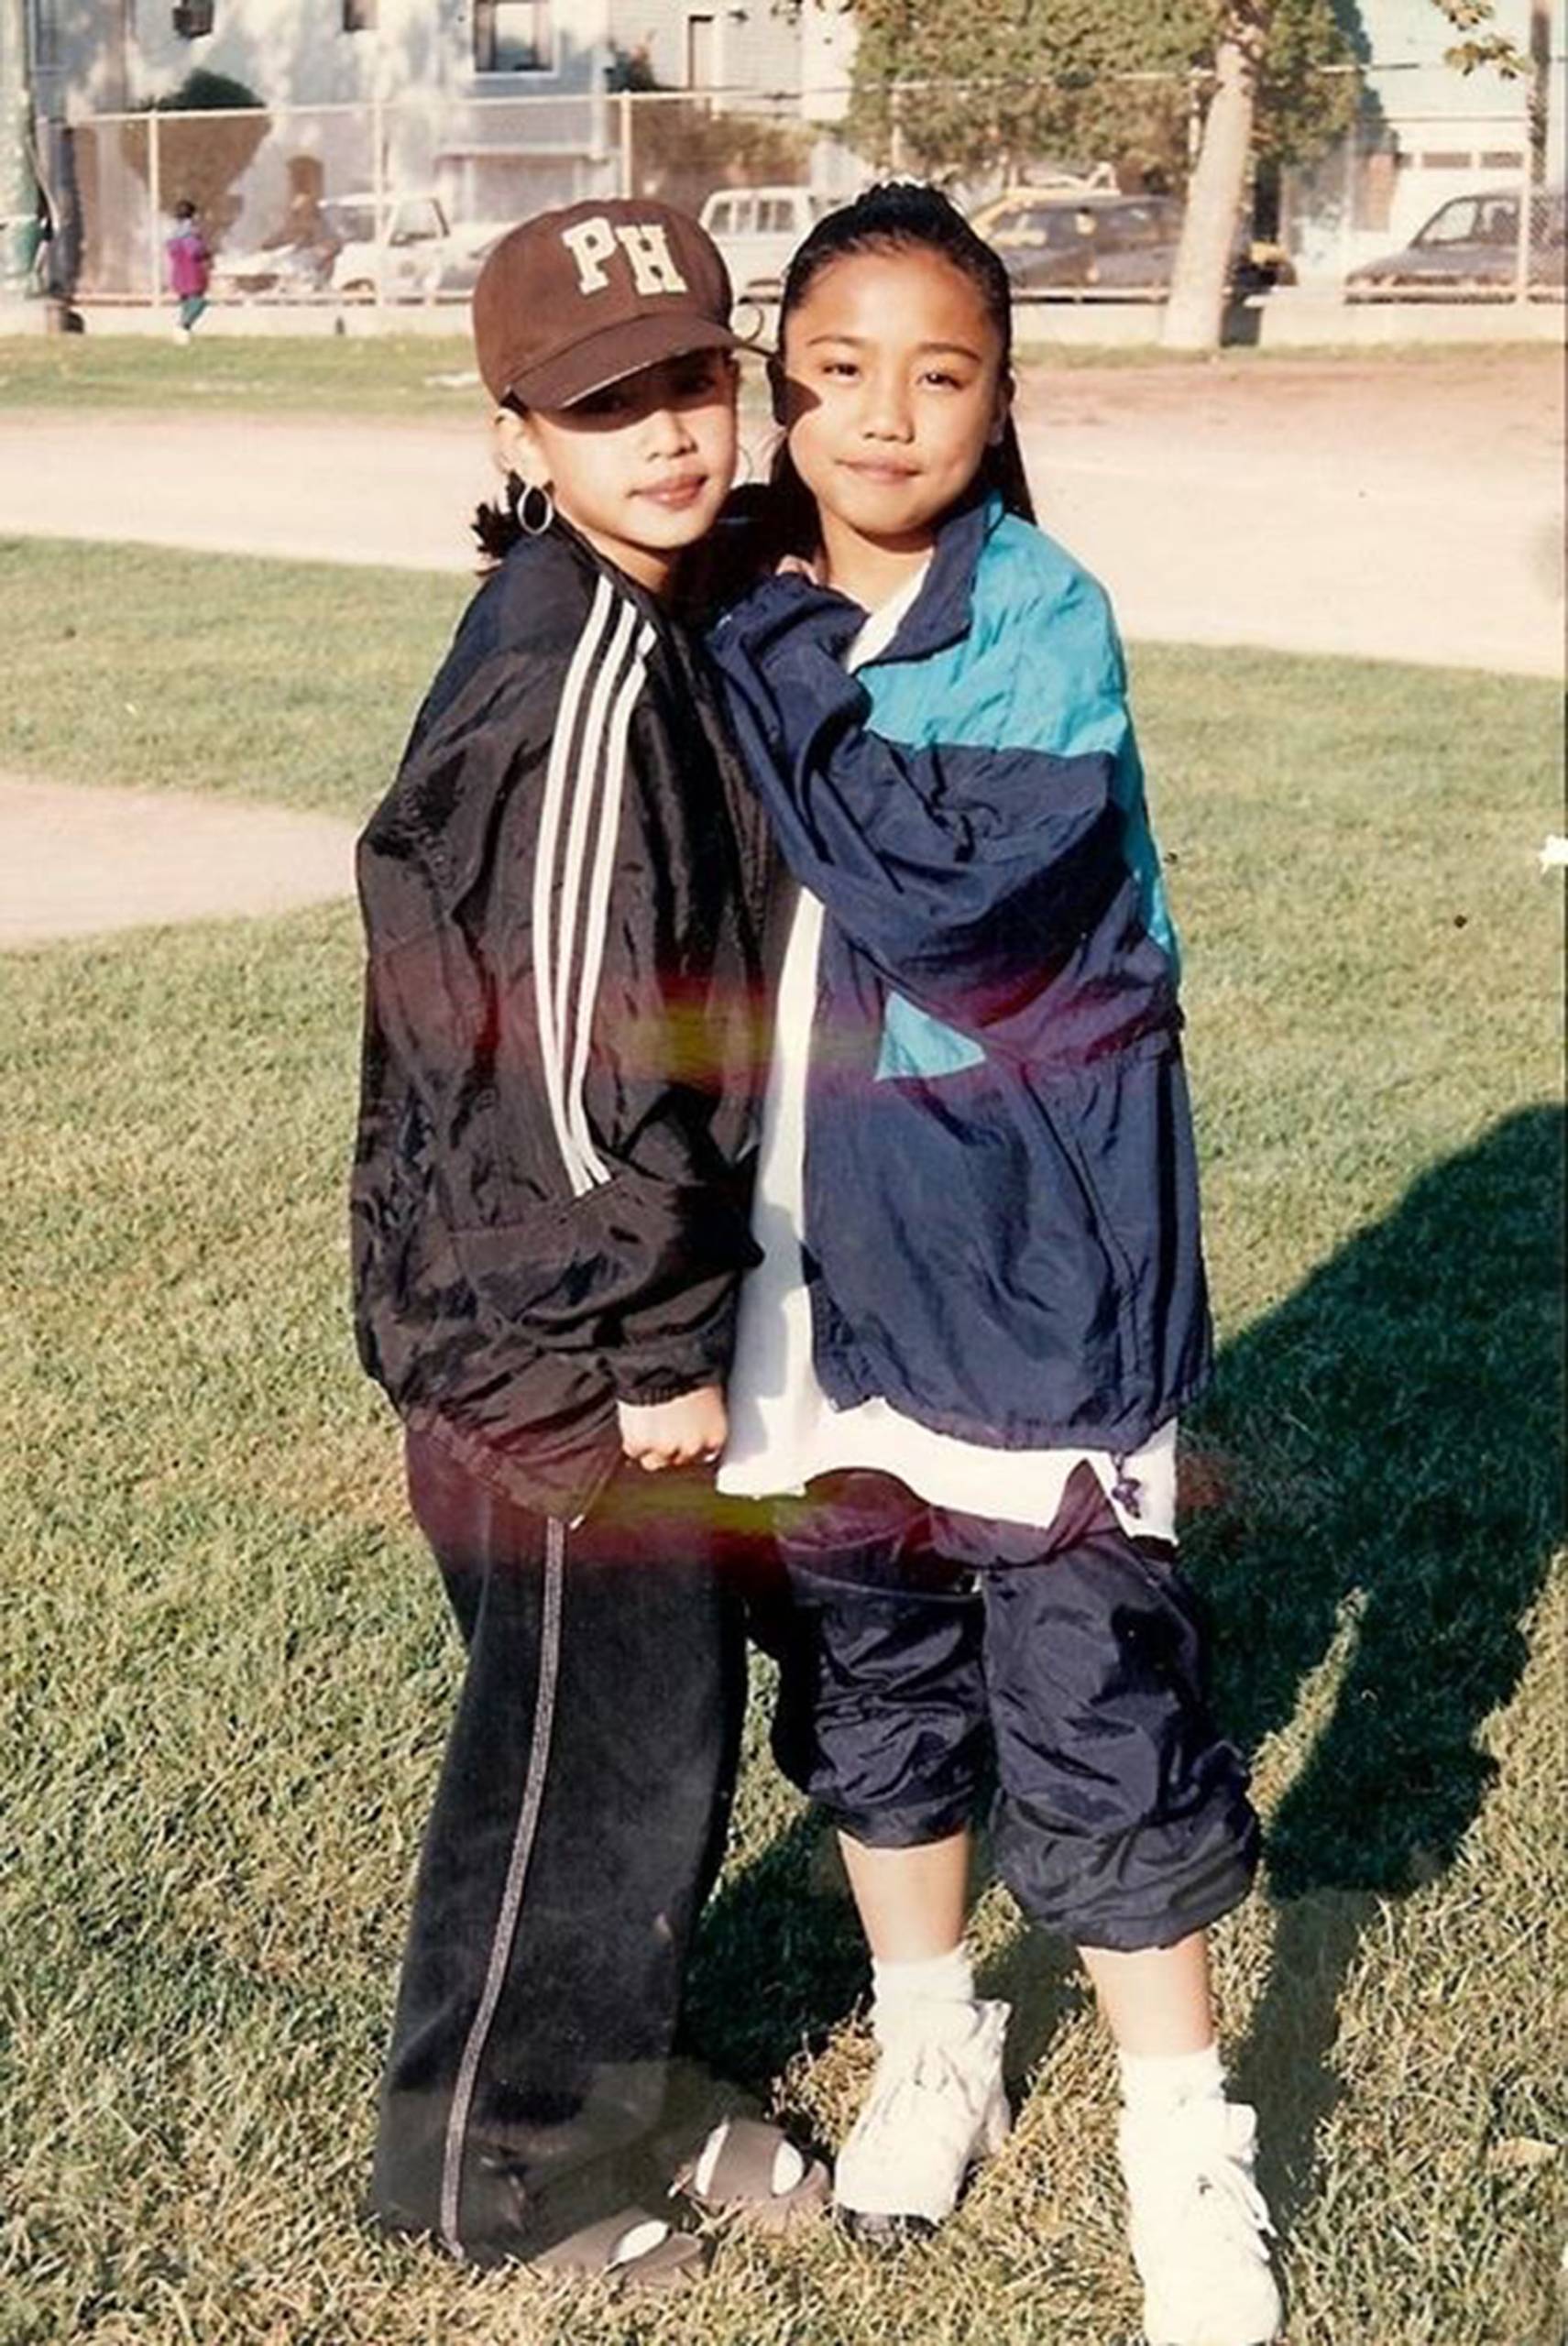 Two middle school age Filipino American girls dressed in athletic warm-ups, in a throwback photo from the 1990s.